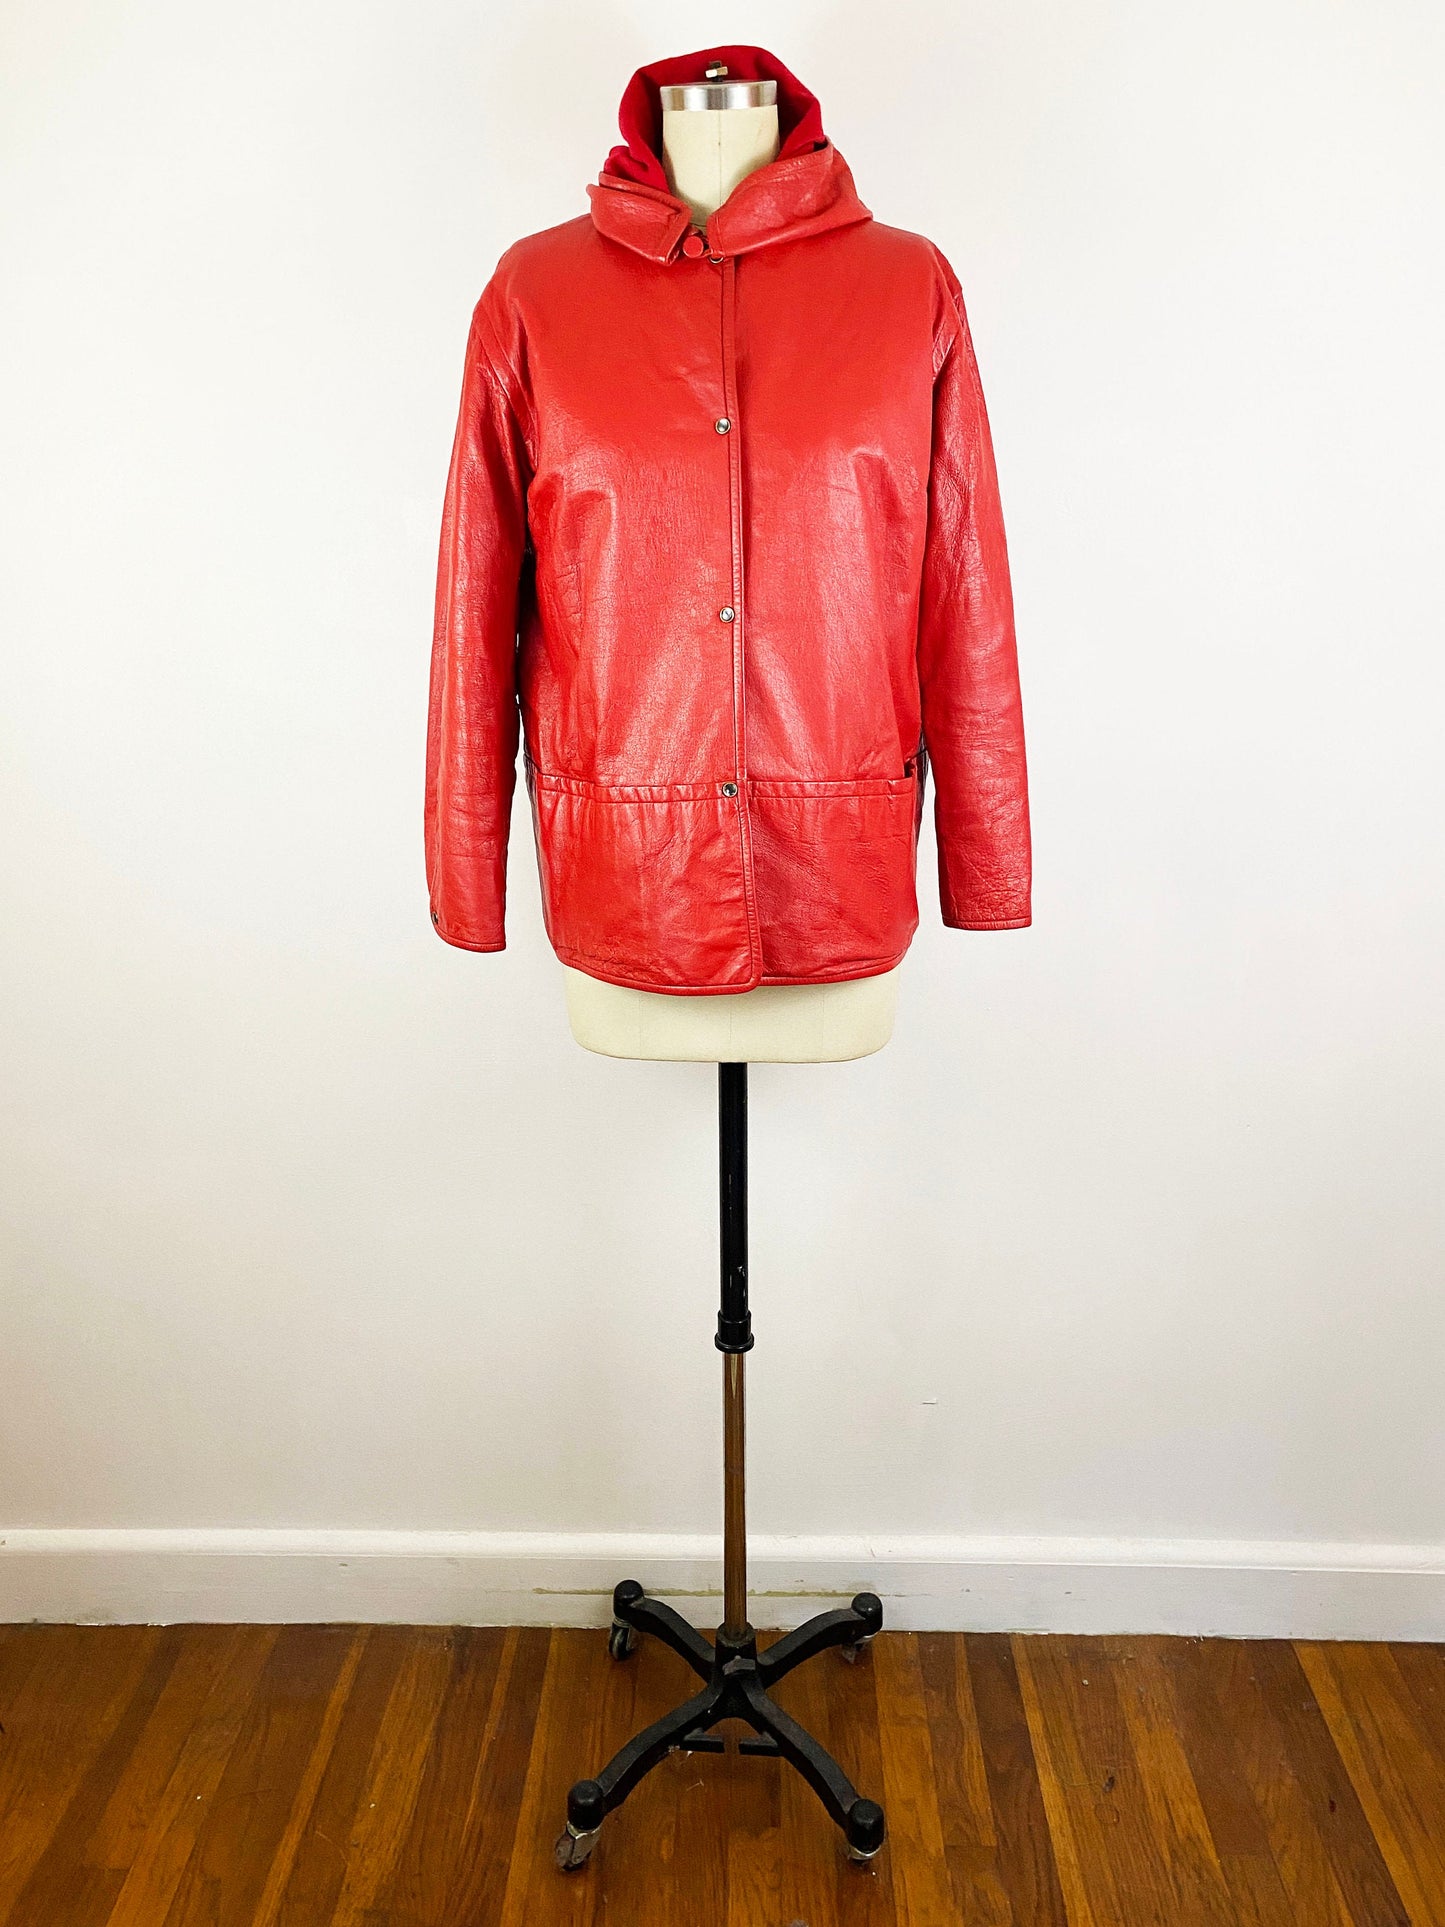 1960s Bonnie Cashin Sills Bright Red Glove Tanned Leather Hooded Jacket Pearl Snaps Car Coat Mod Minimalist Coach Wool Lined / Size Large